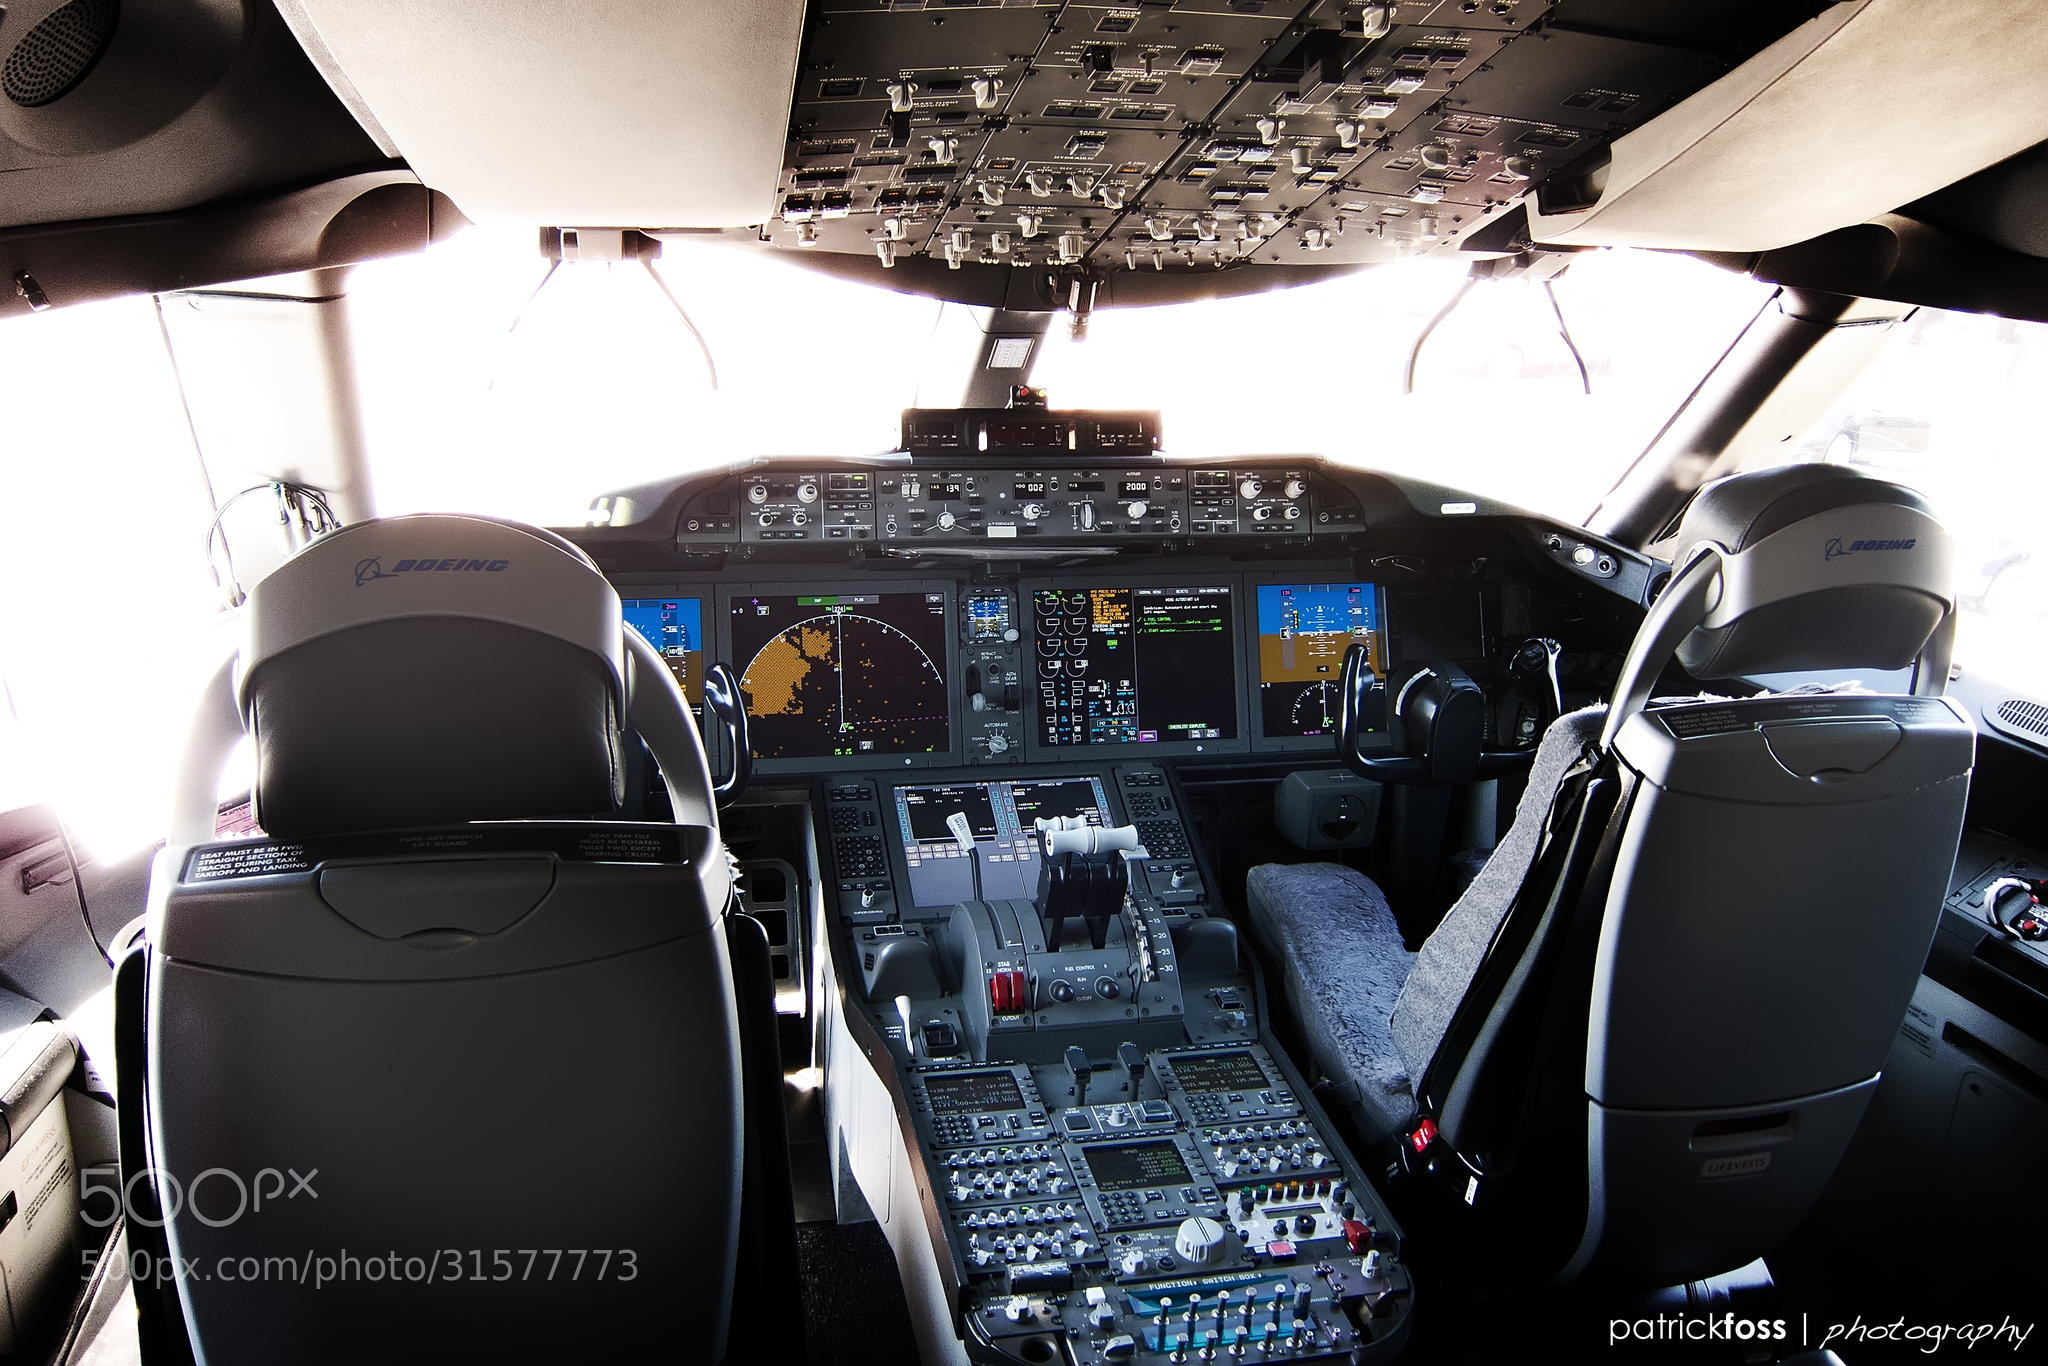 2048x1366 Boeing 787 Cockpit Wallpaper The boeing 787 will be flying